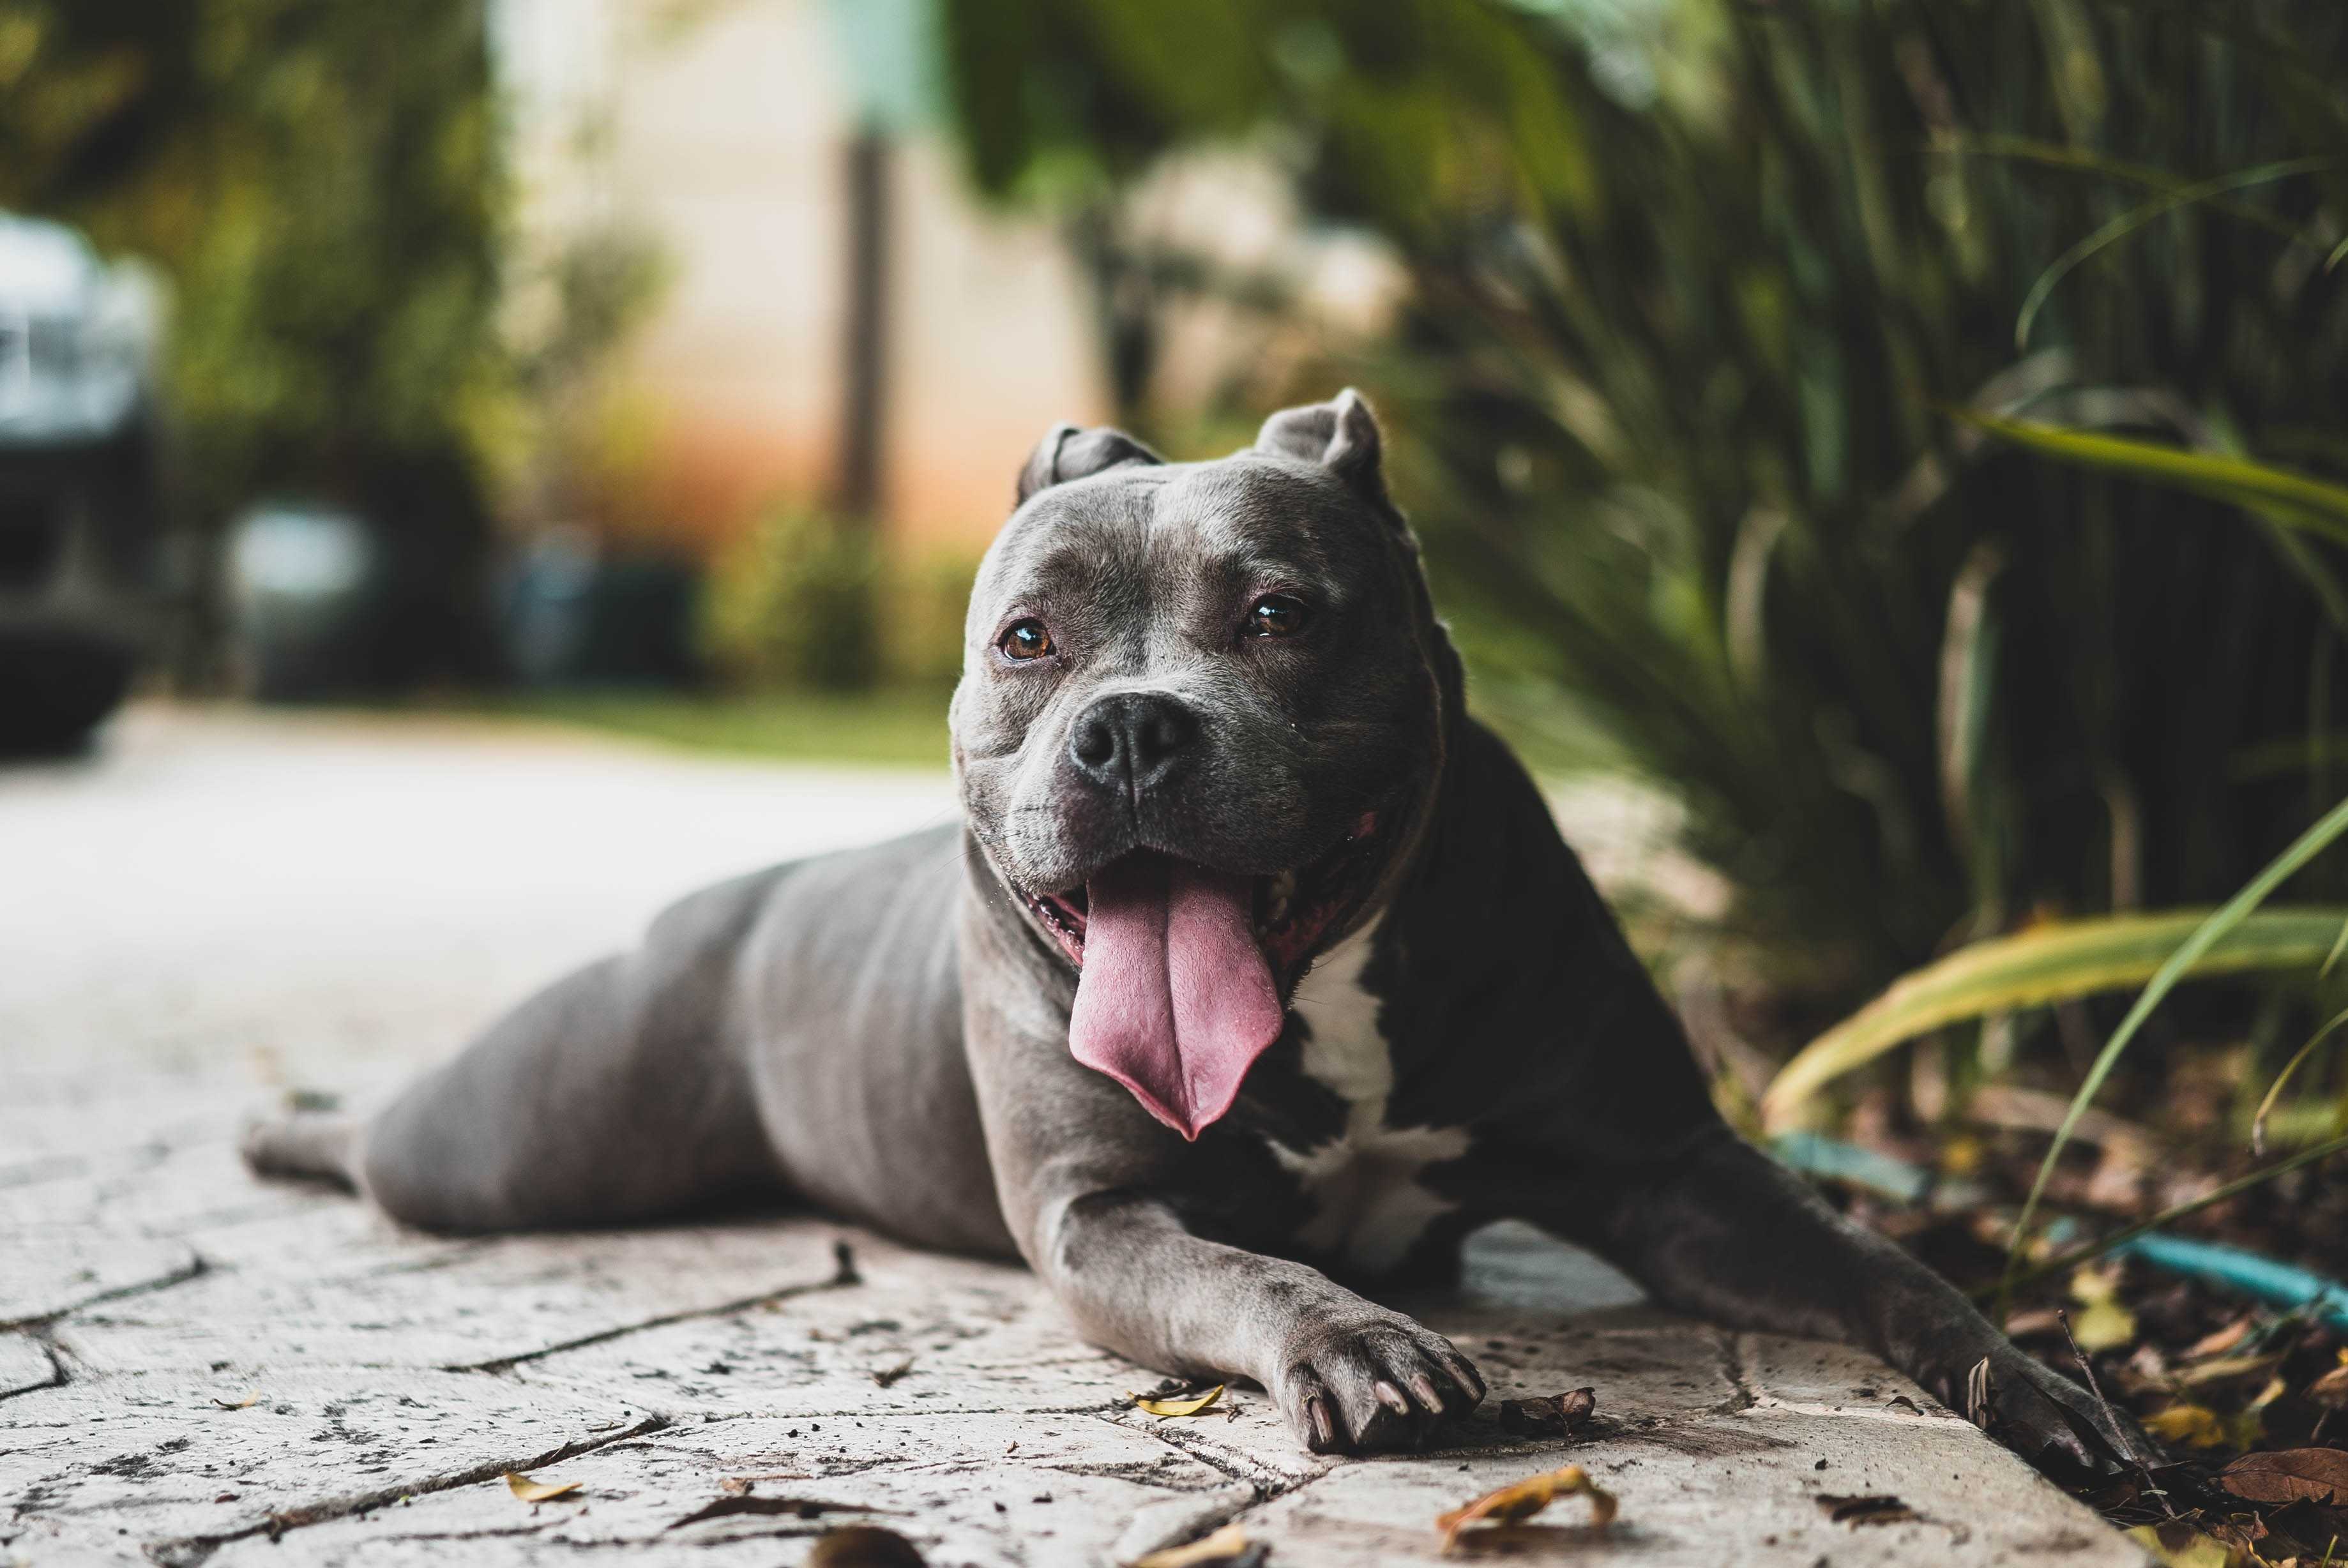 A gray pitbull relaxing on the sidewalk with its tongue hanging out